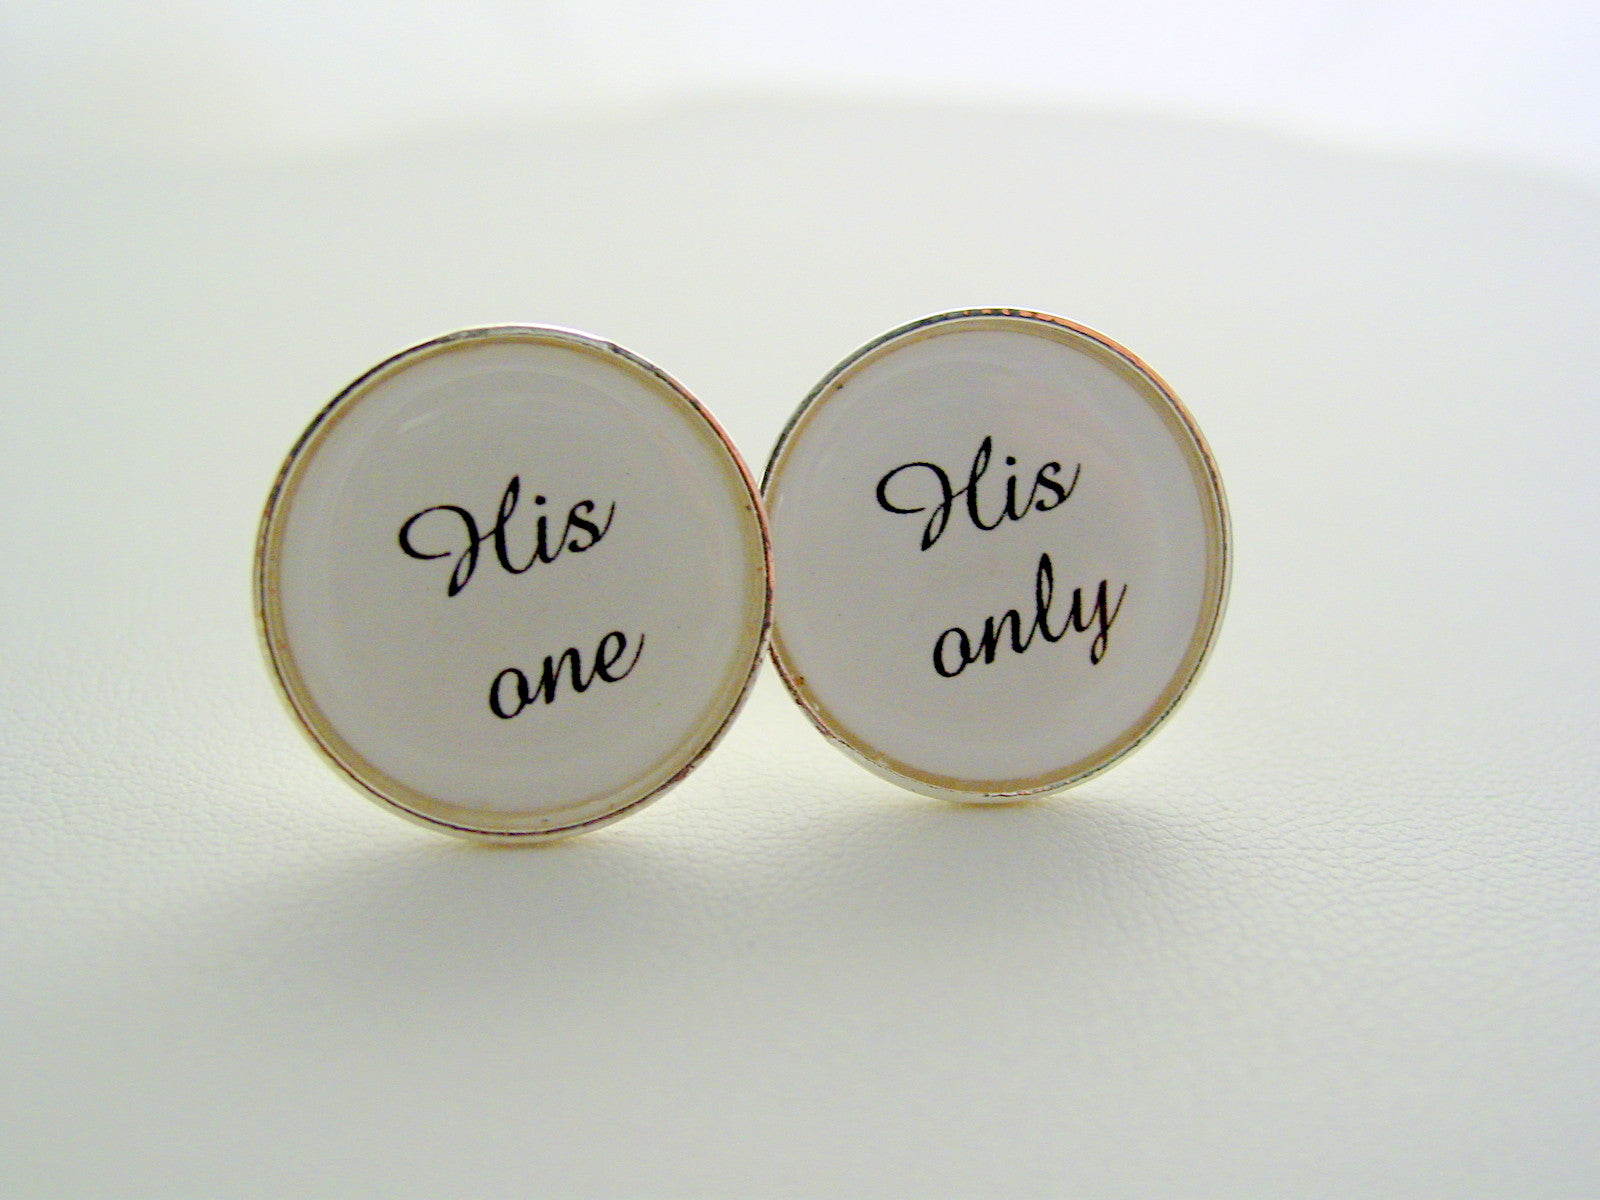 Wedding Gift From Bride To Groom His One His Only Cufflinks Dress Clips